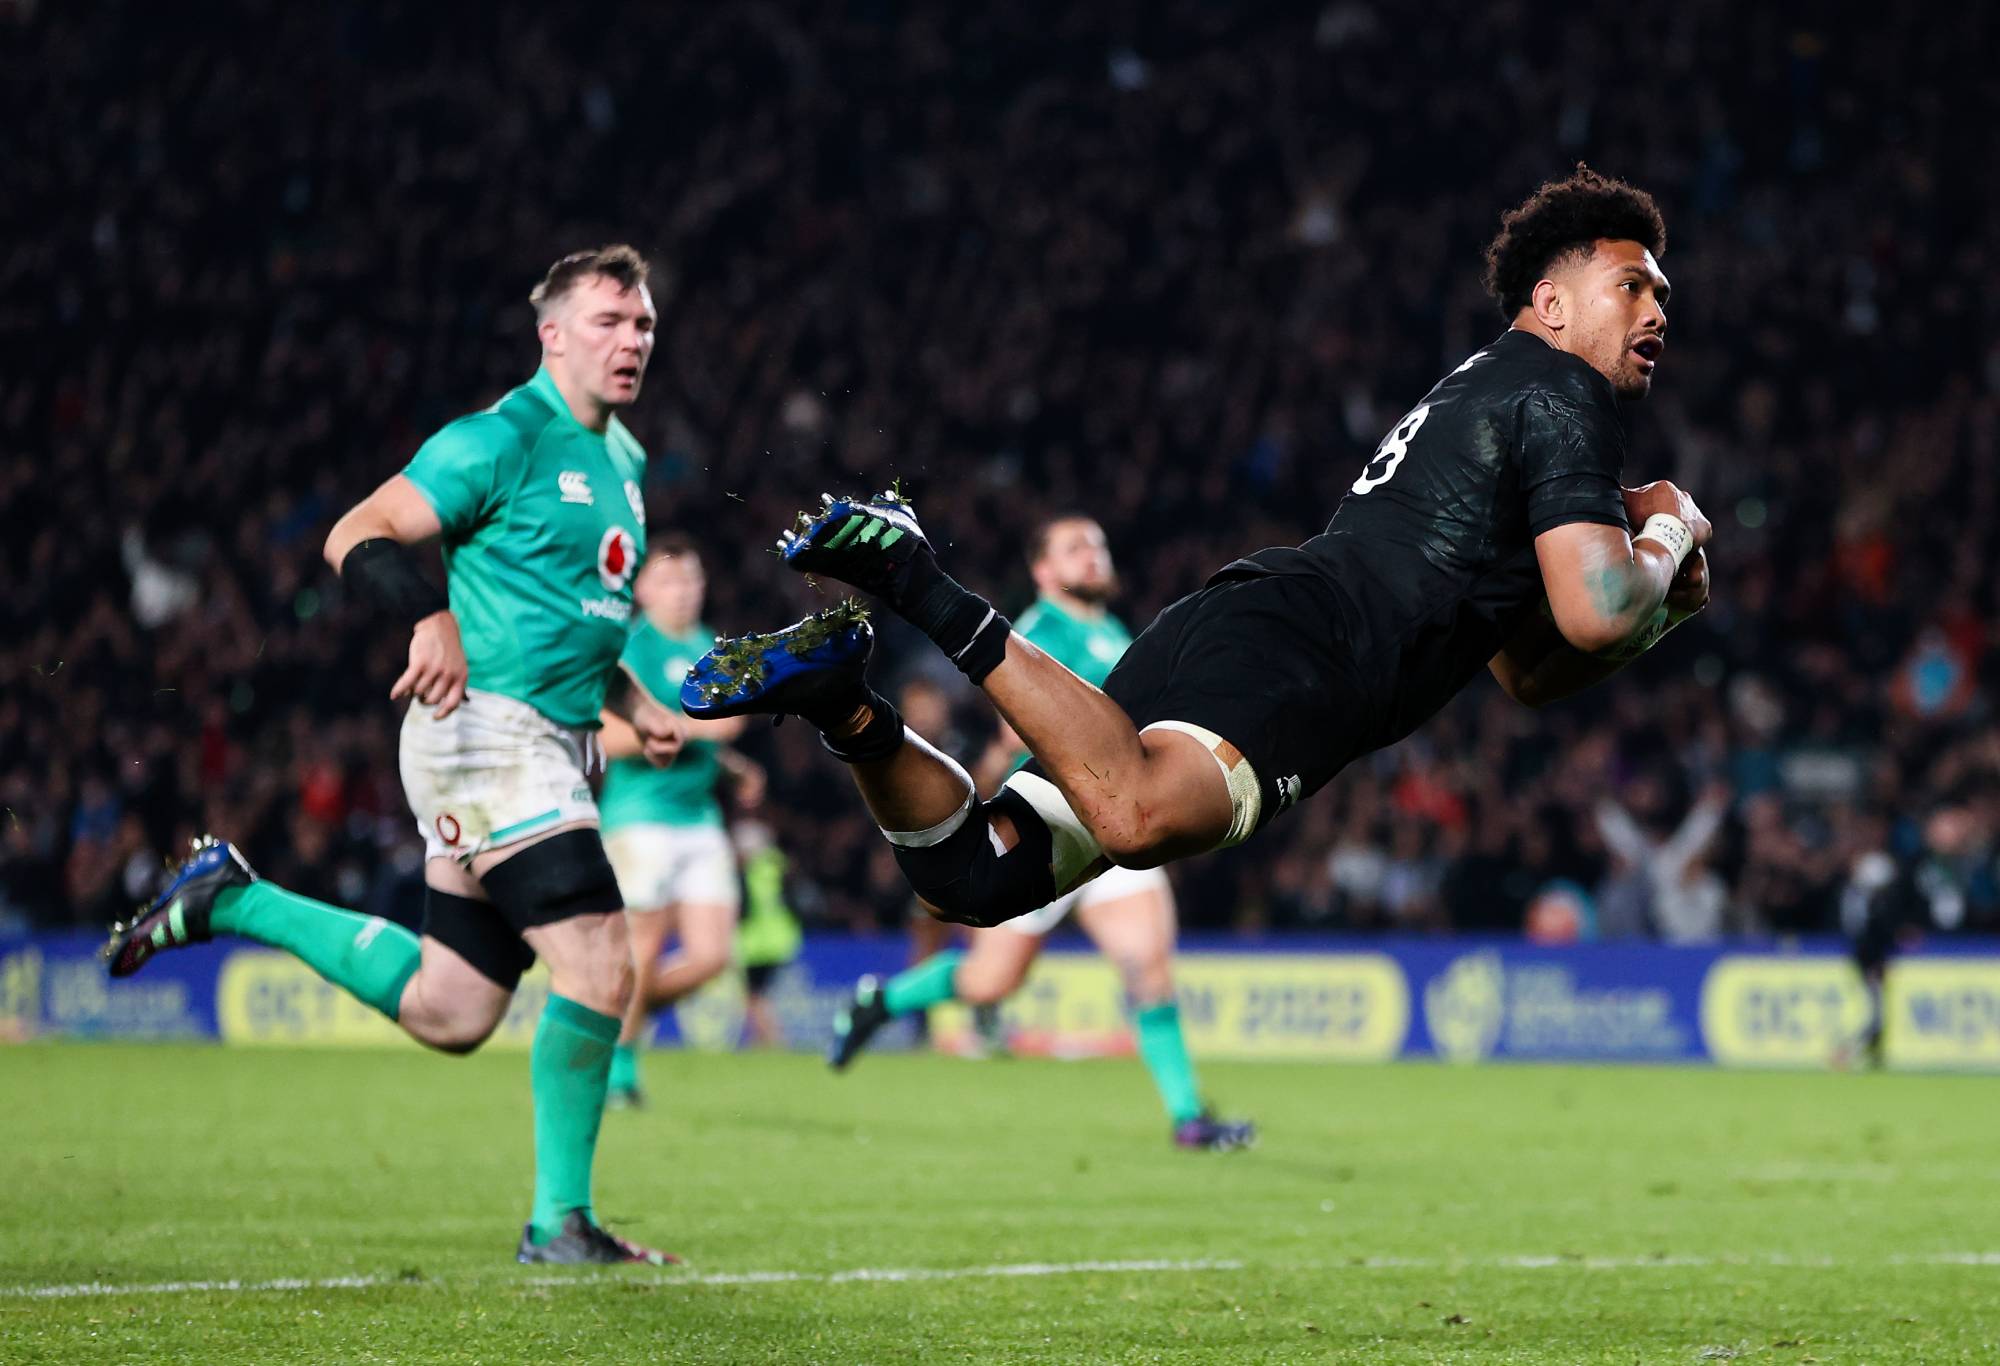 Ardie Savea of New Zealand scores a try during the International test Match in the series between the New Zealand All Blacks and Ireland at Eden Park on July 02, 2022 in Auckland, New Zealand. (Photo by Phil Walter/Getty Images)